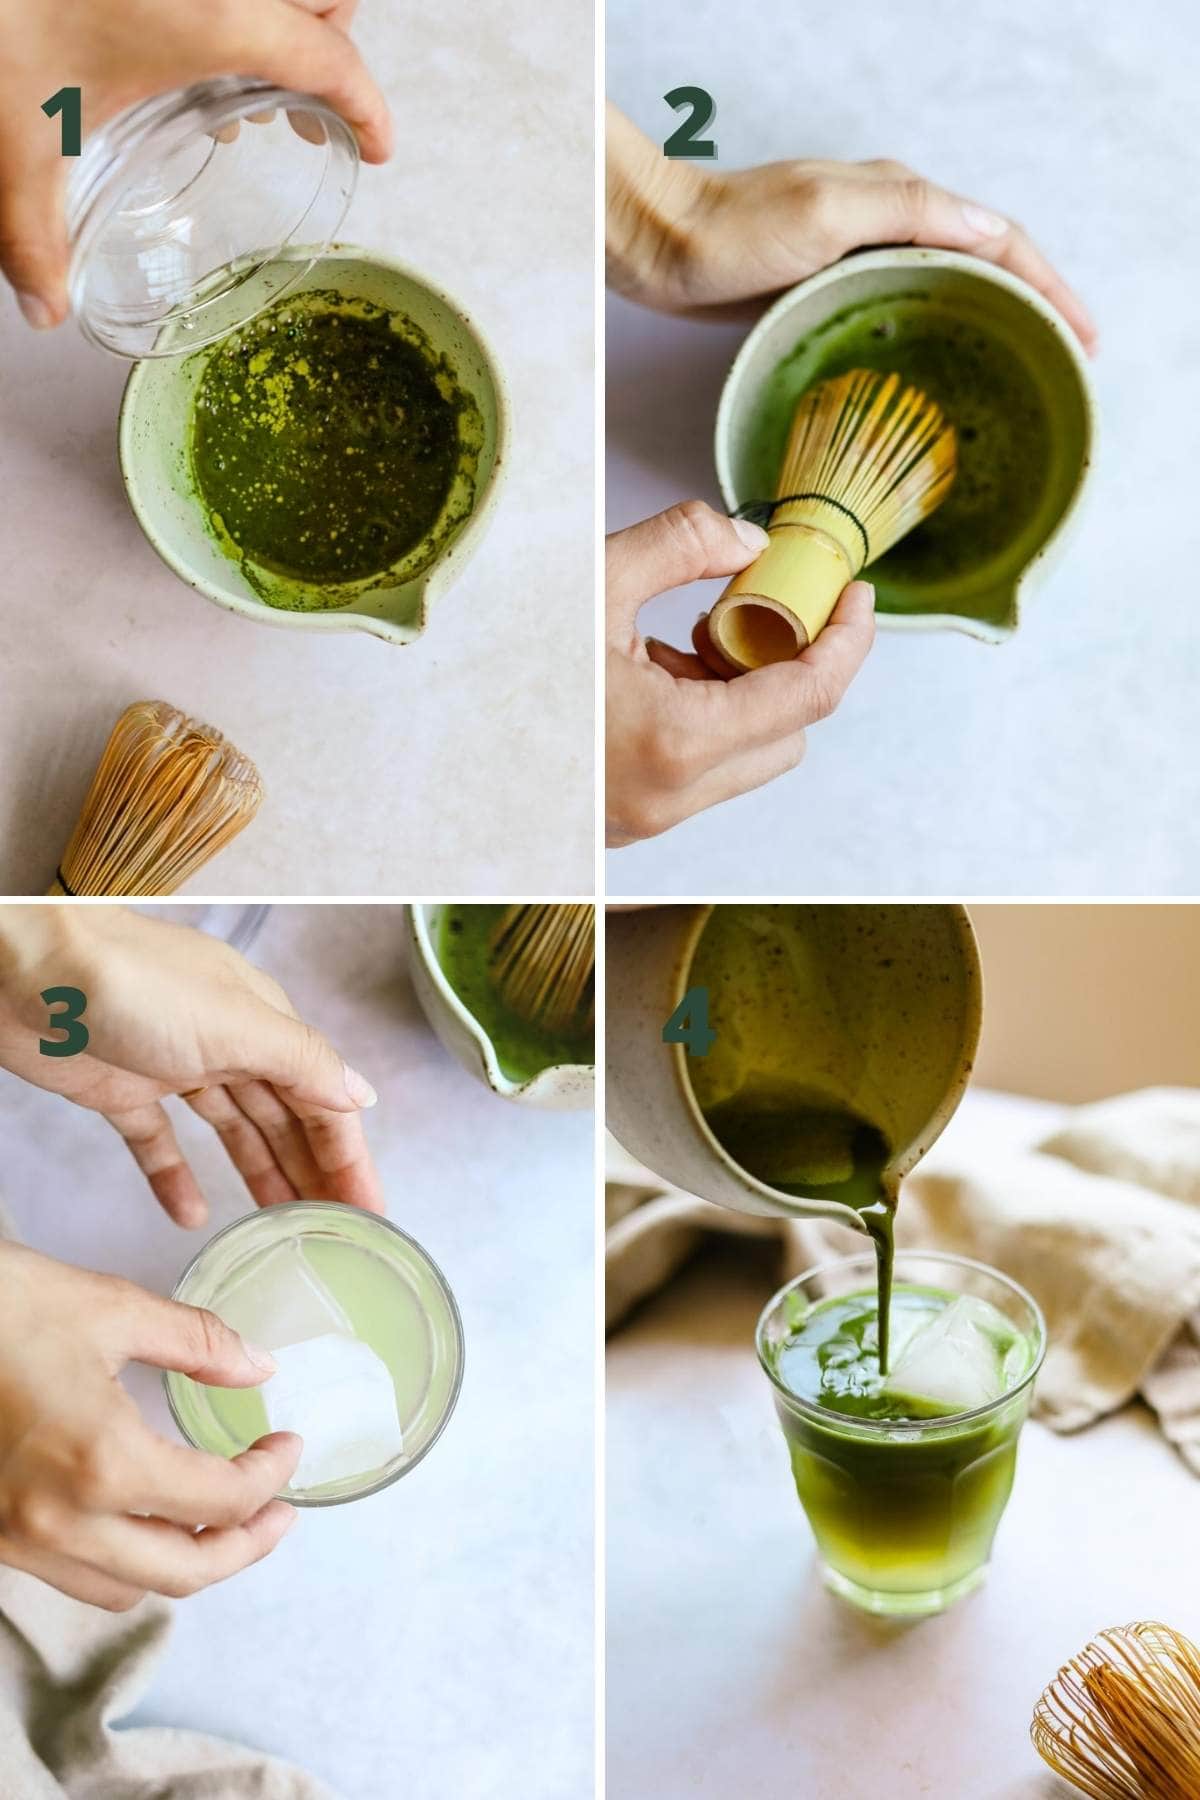 Steps to make green tea lemonade, including whisking the tea, adding ice, and mixing lemonade with matcha.